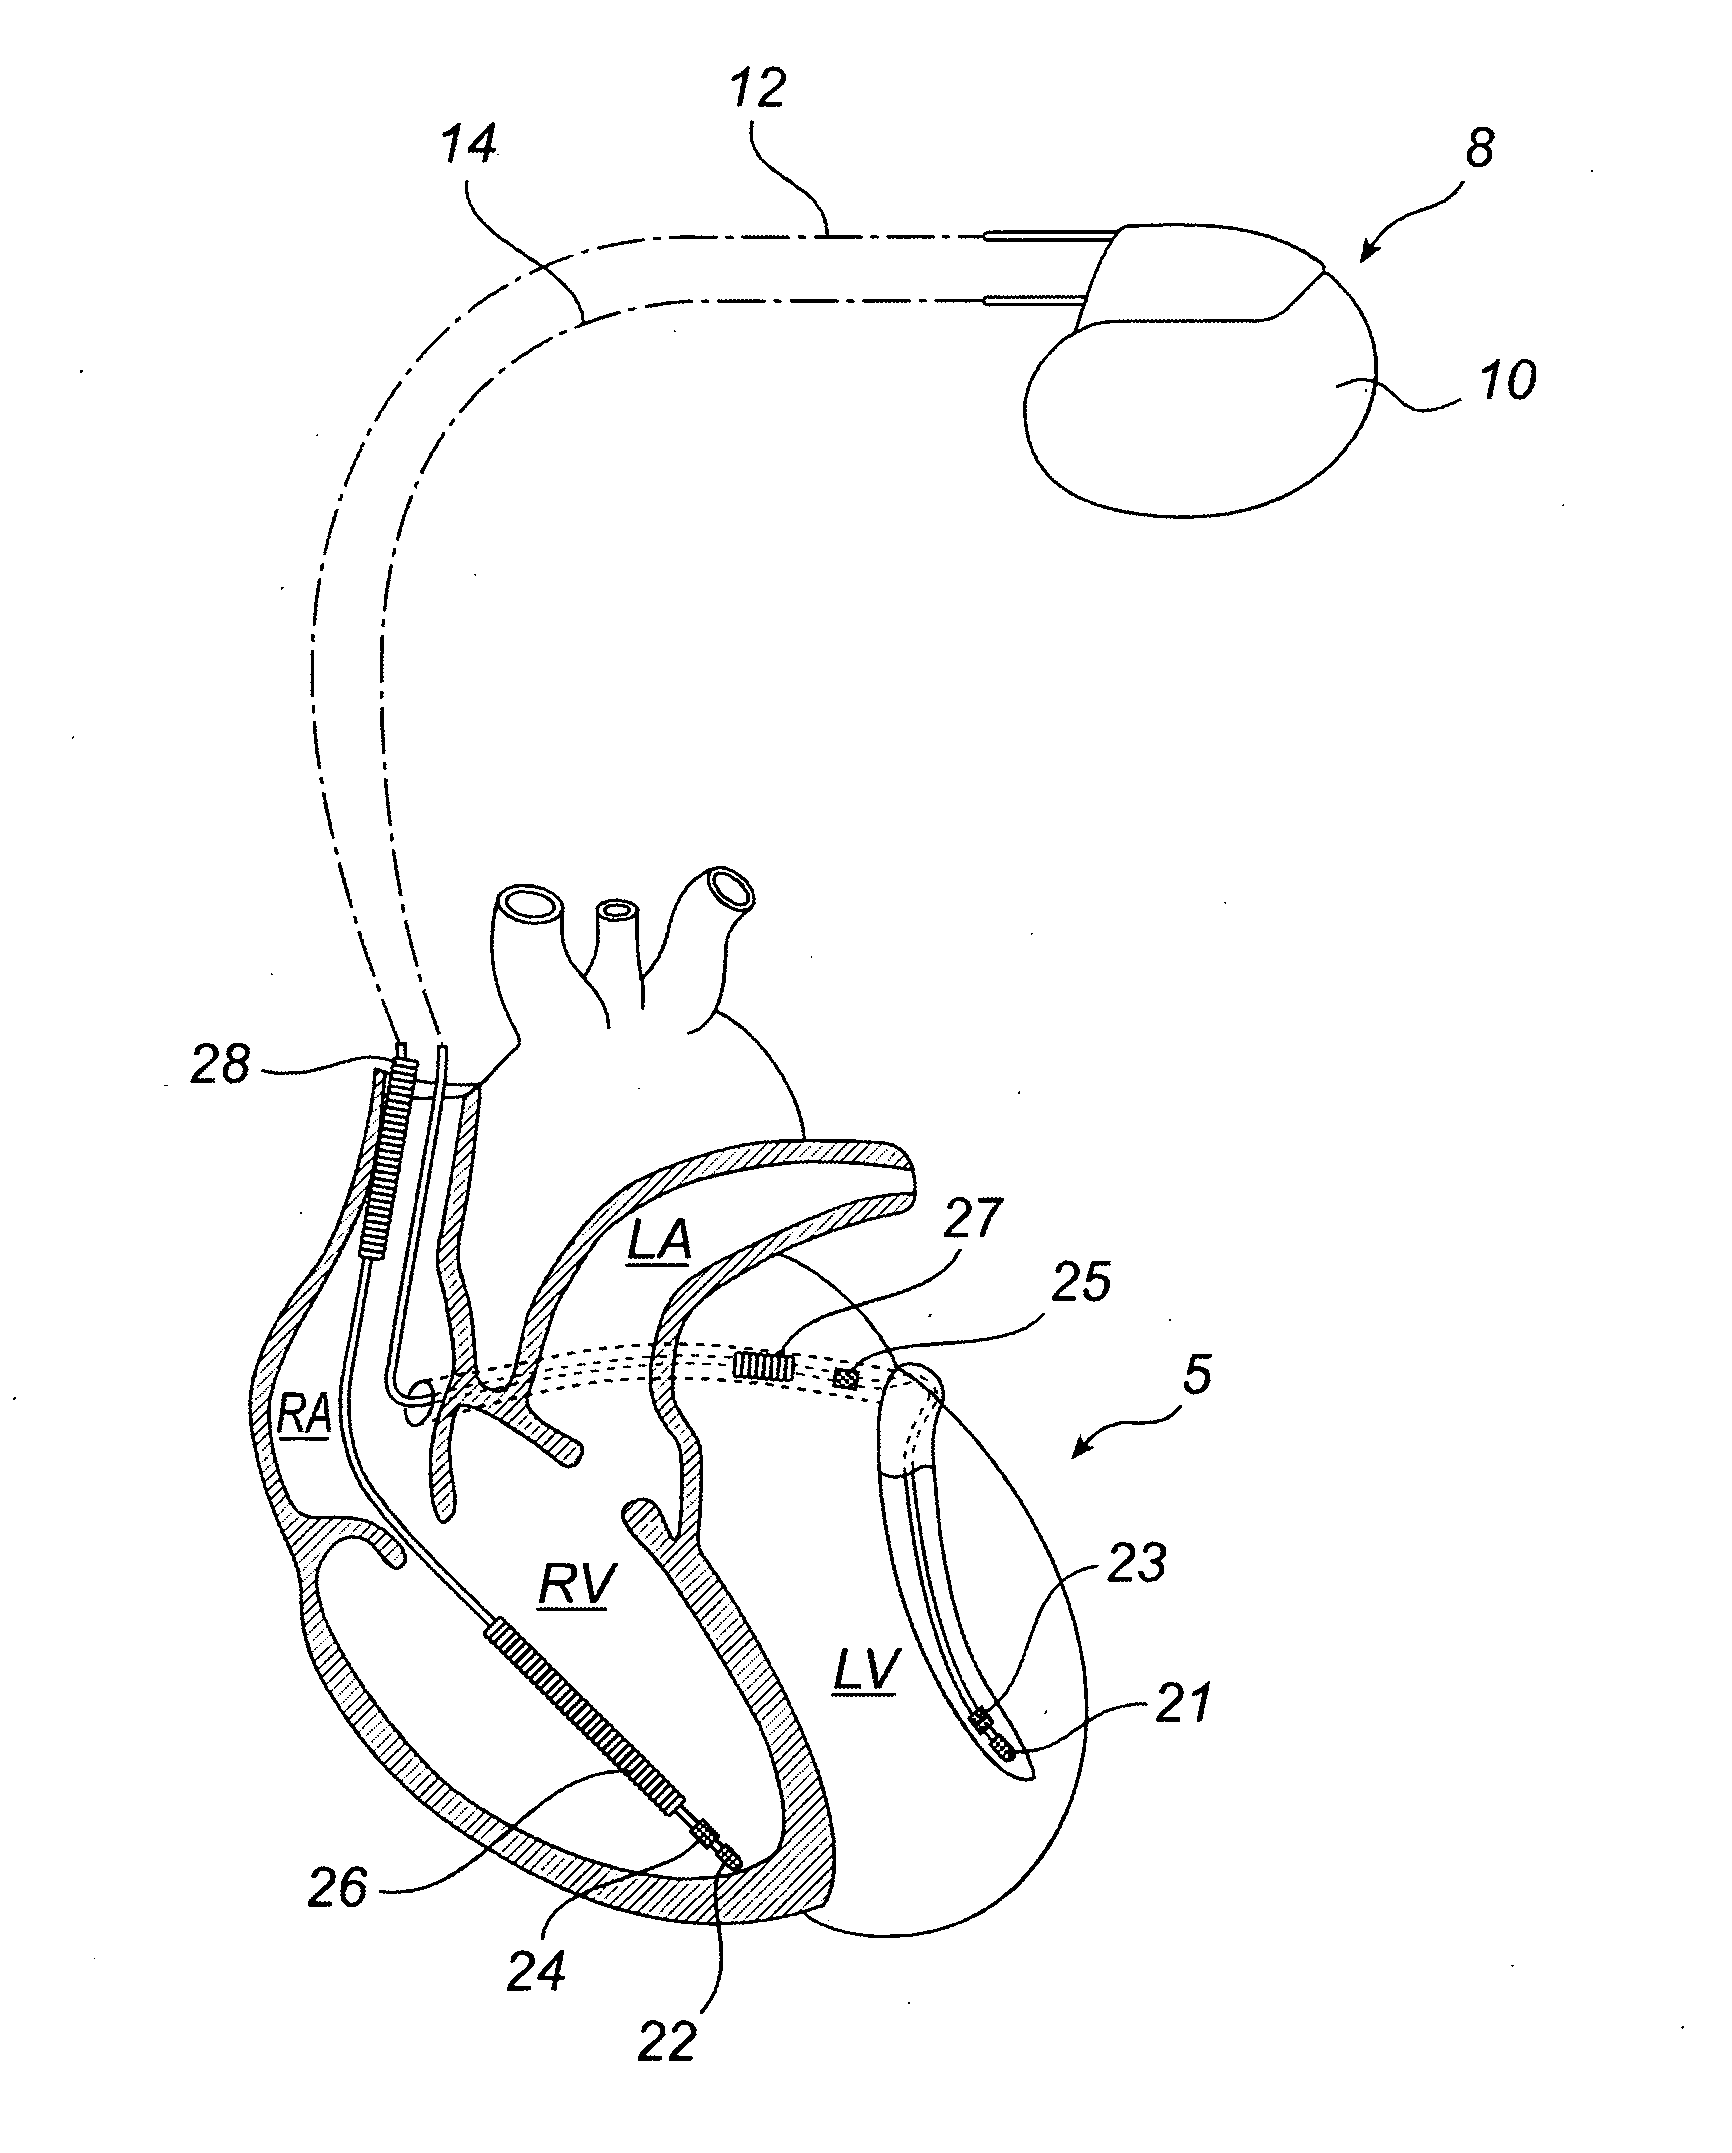 Devices and method for determining and monitoring a cardiac status of a patient by using plvdt or plvst parameters